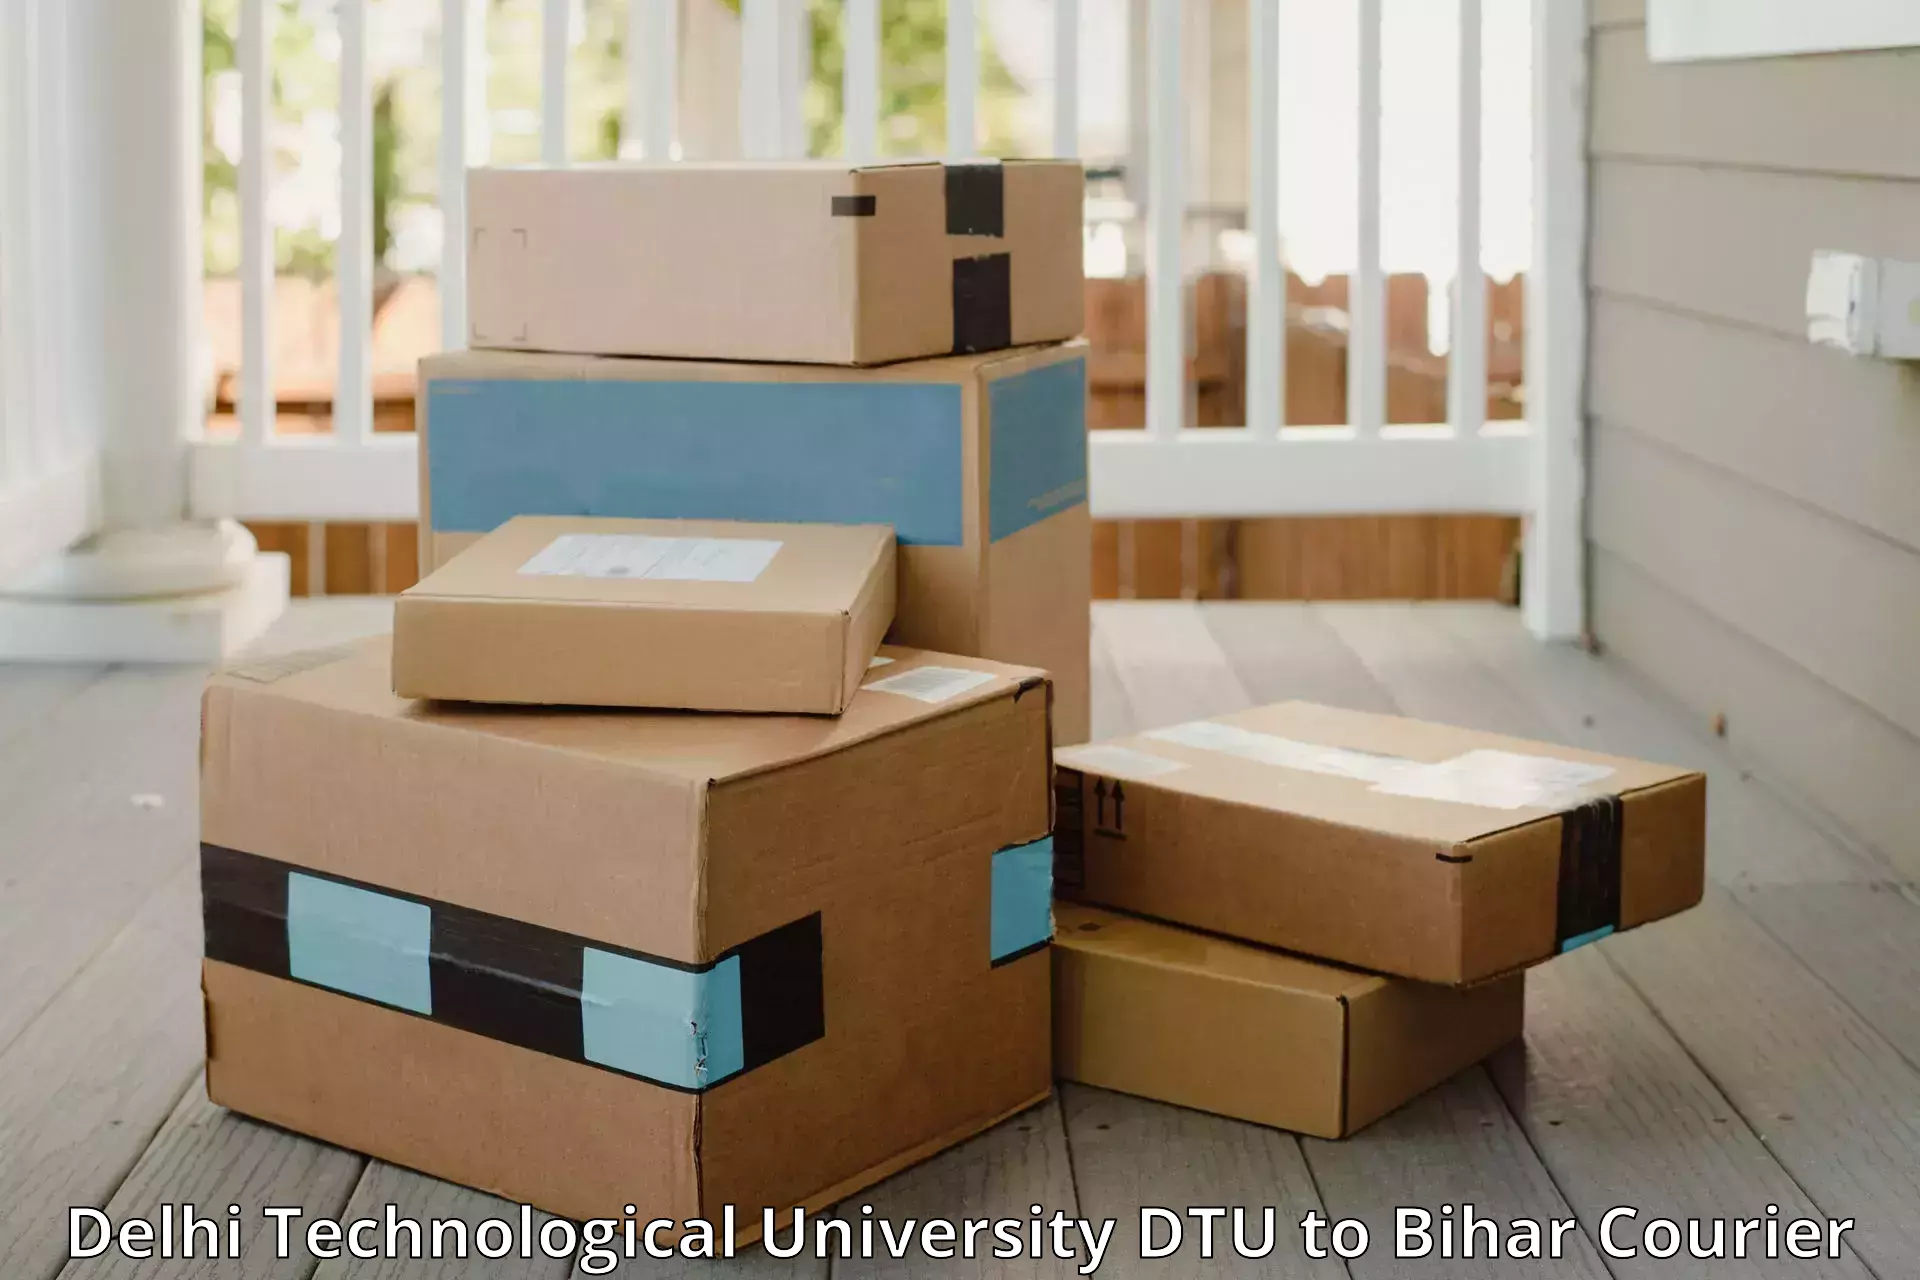 Luggage delivery providers Delhi Technological University DTU to Sheohar